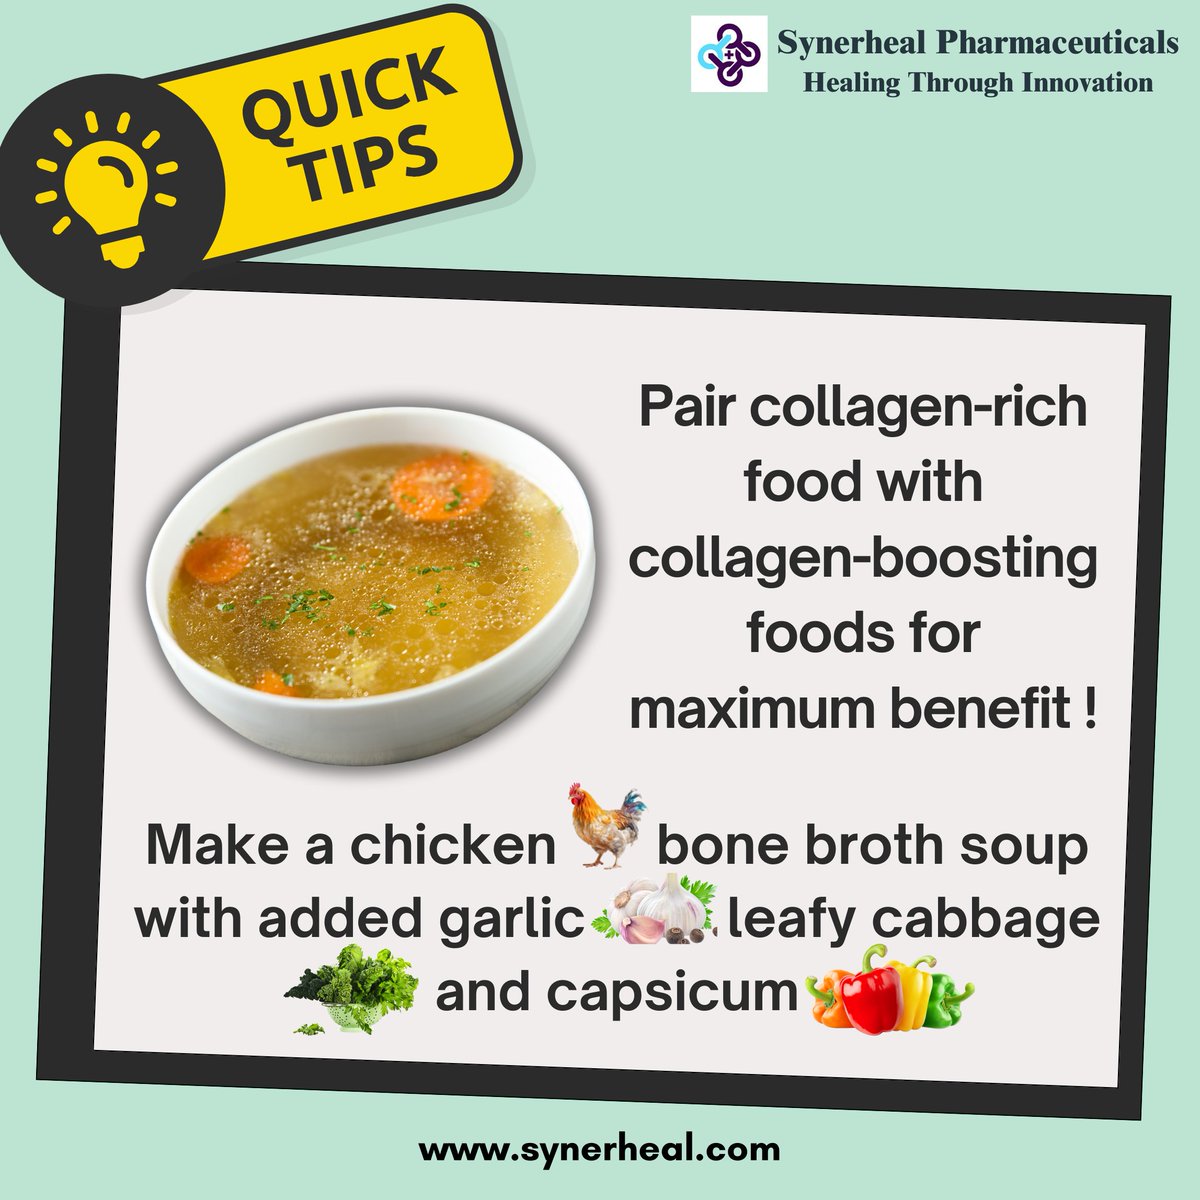 Pro Tips🥣✨

Combine Foods: Pair collagen-rich food with collagen-boosting foods for maximum benefit. For example, Make a chicken bone broth soup 🥣 with a🧄, leafy cabbage 🥬, and capsicum 🫑

#CollagenBoost #BoneBrothSoup #HealthyEating #NutrientRich #WellnessTips